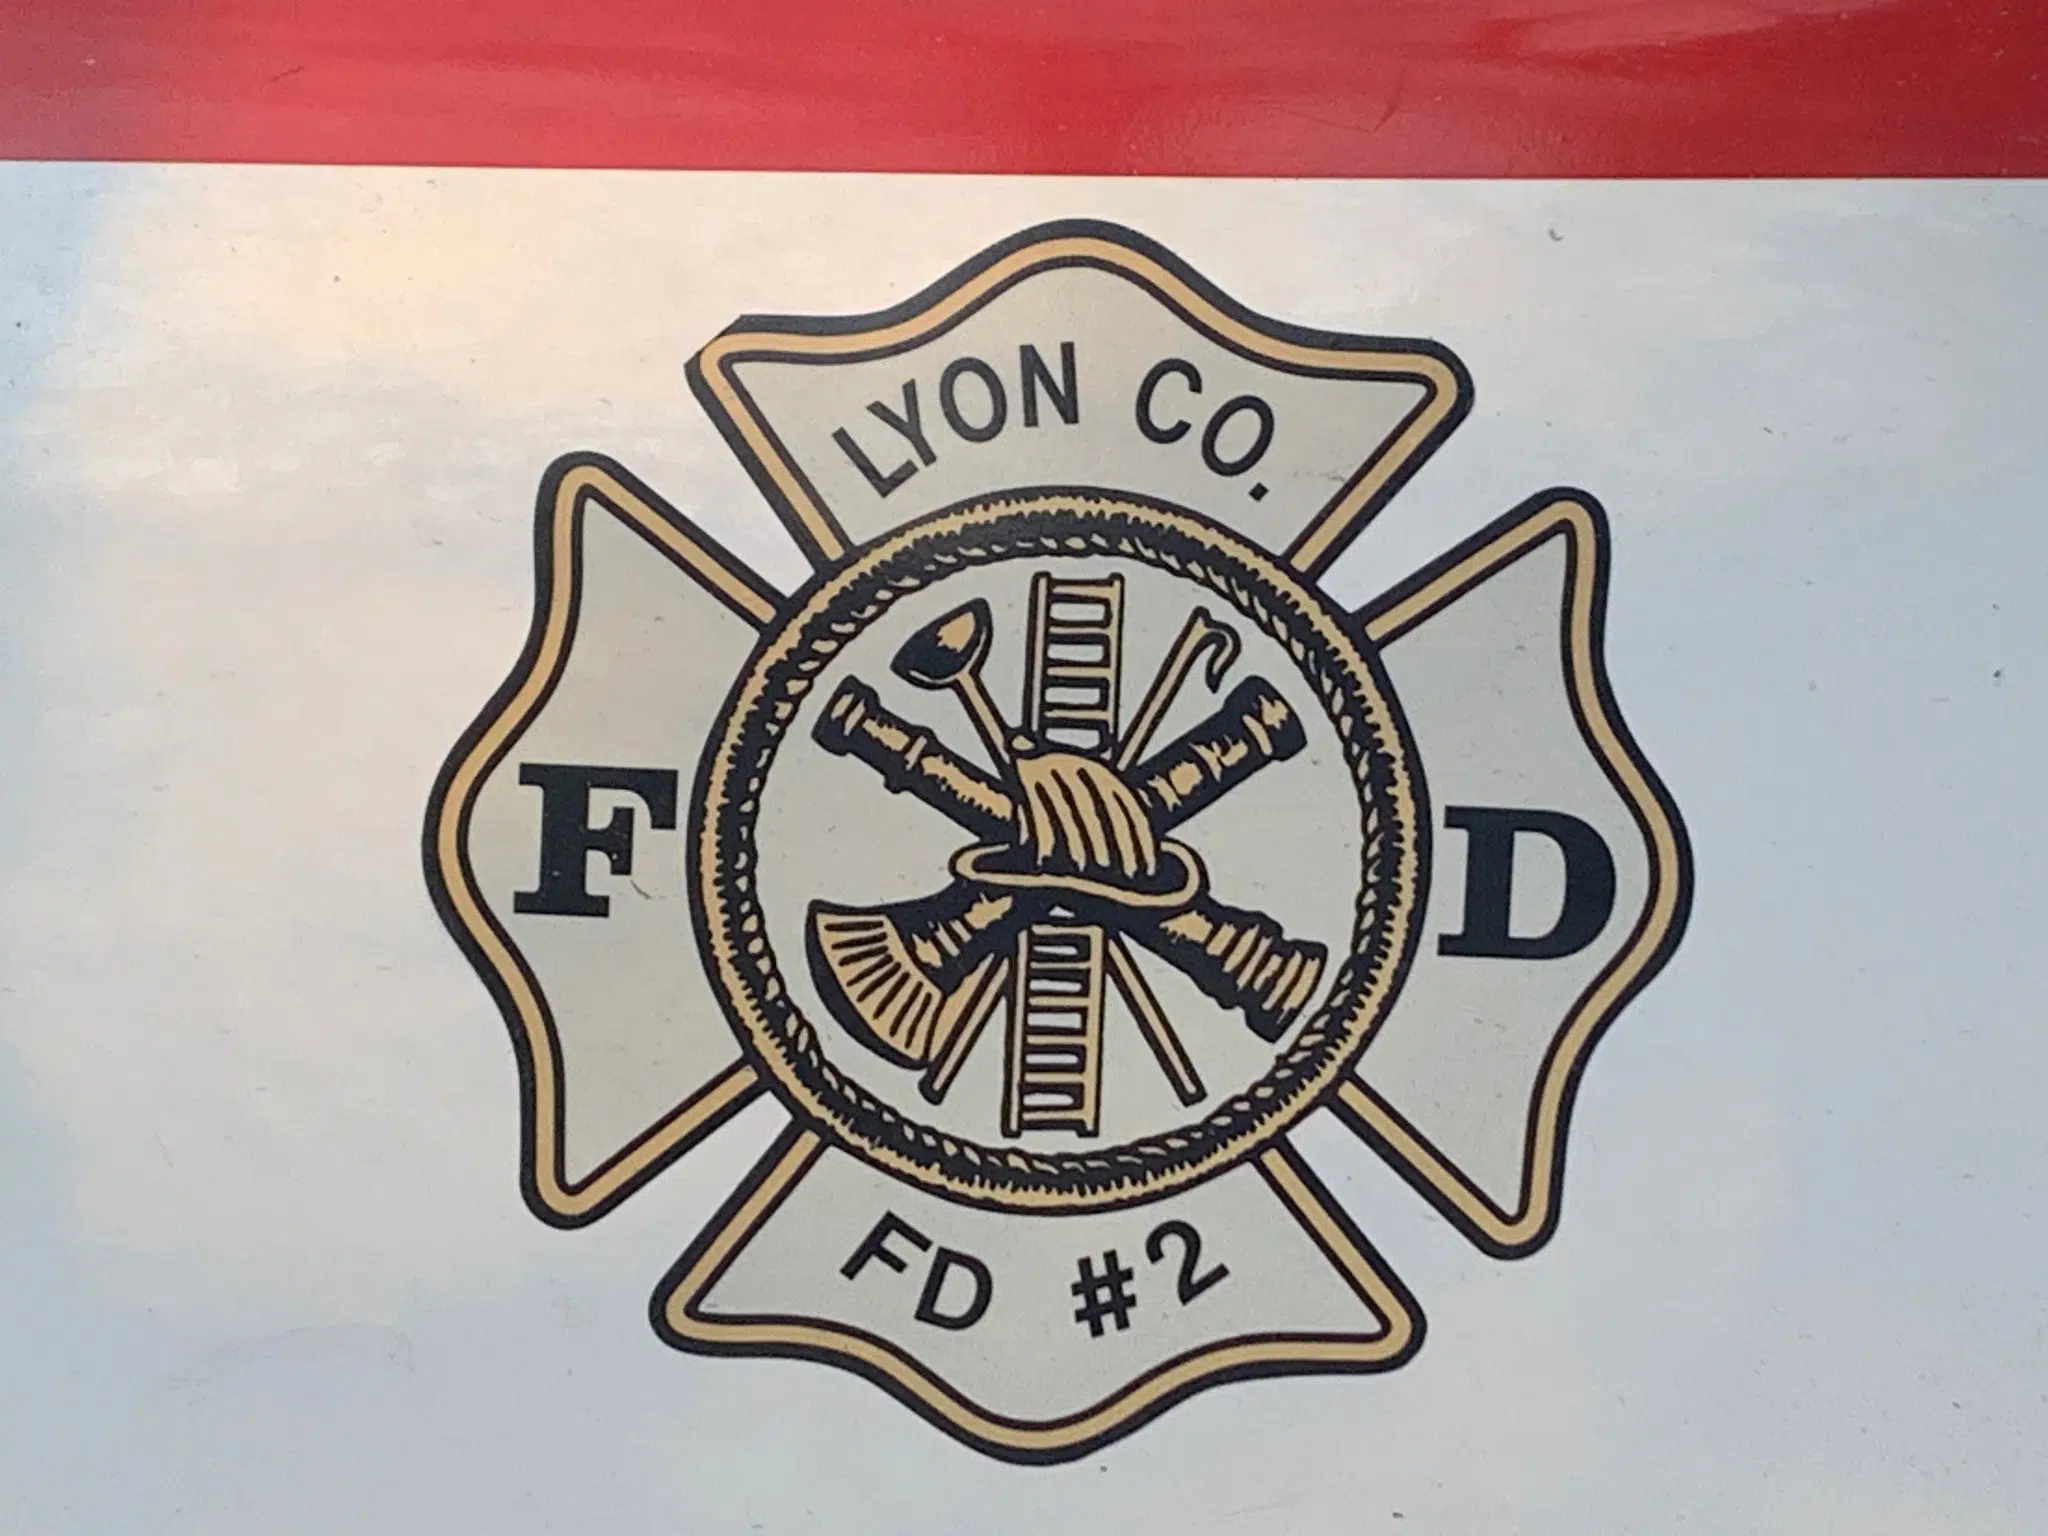 Fire damages dump truck in north Lyon County